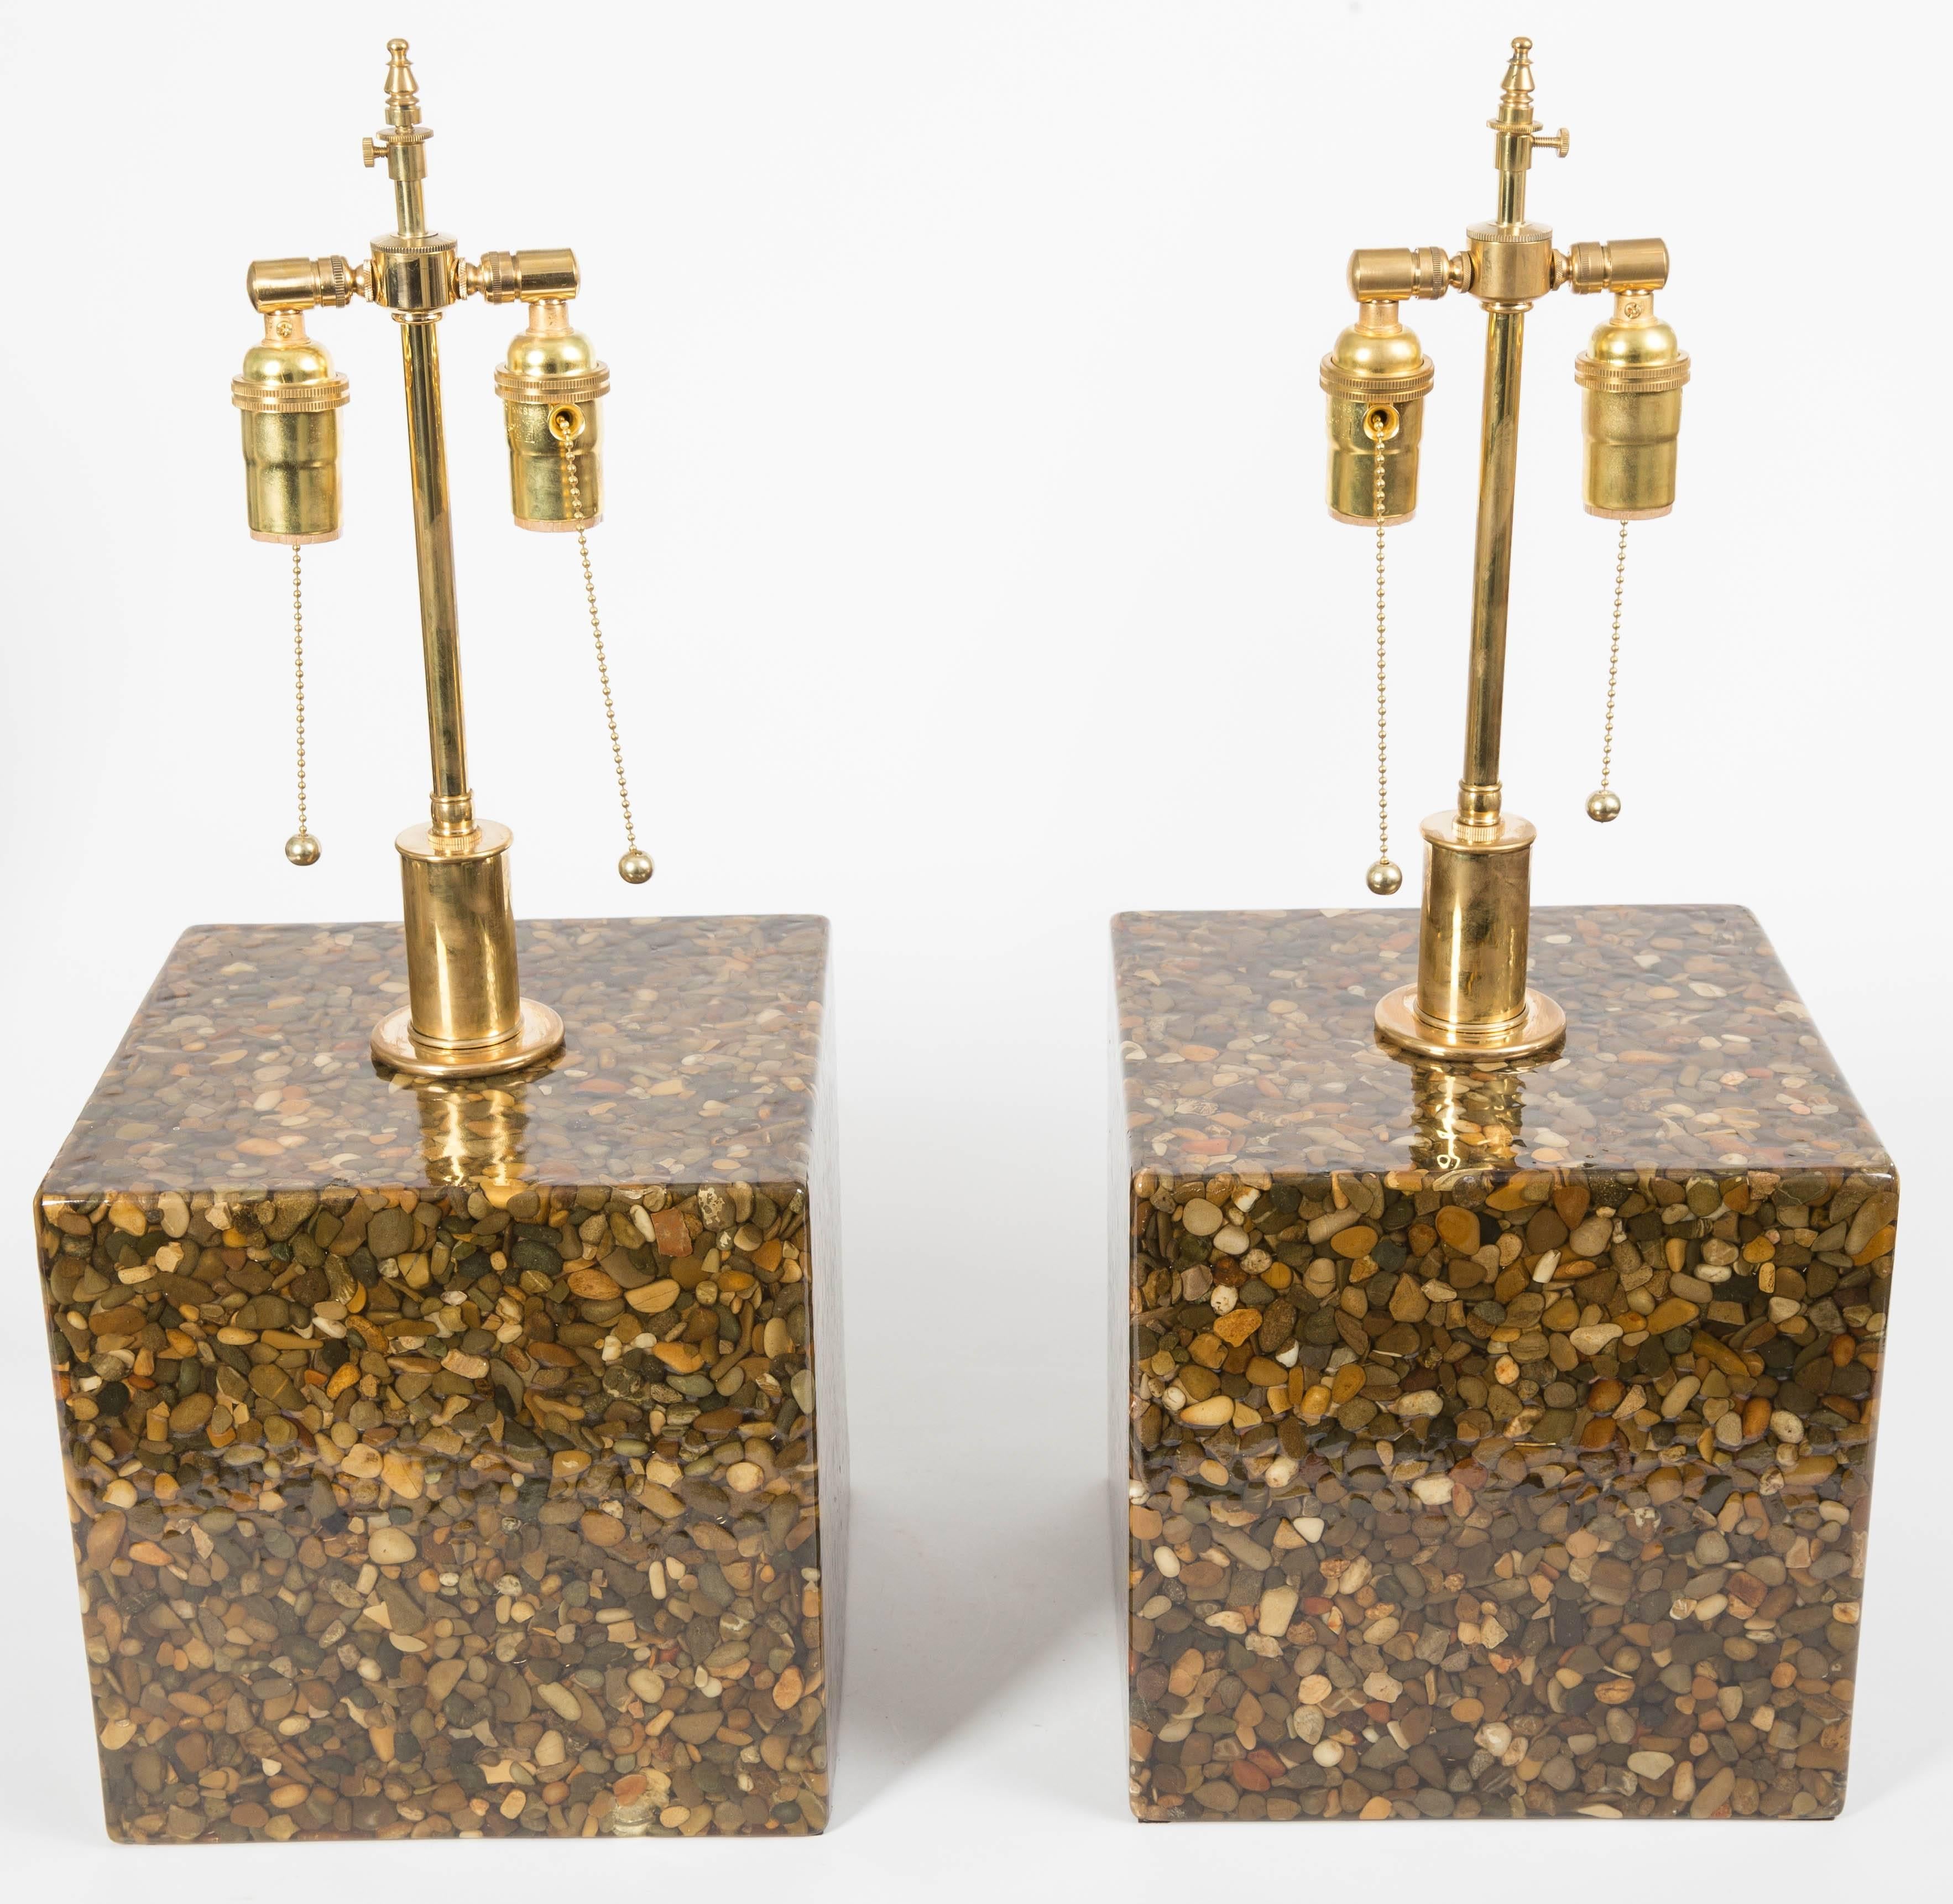 Pair of Cubic Resin and Pebble Lamps with Brass Hardware 2